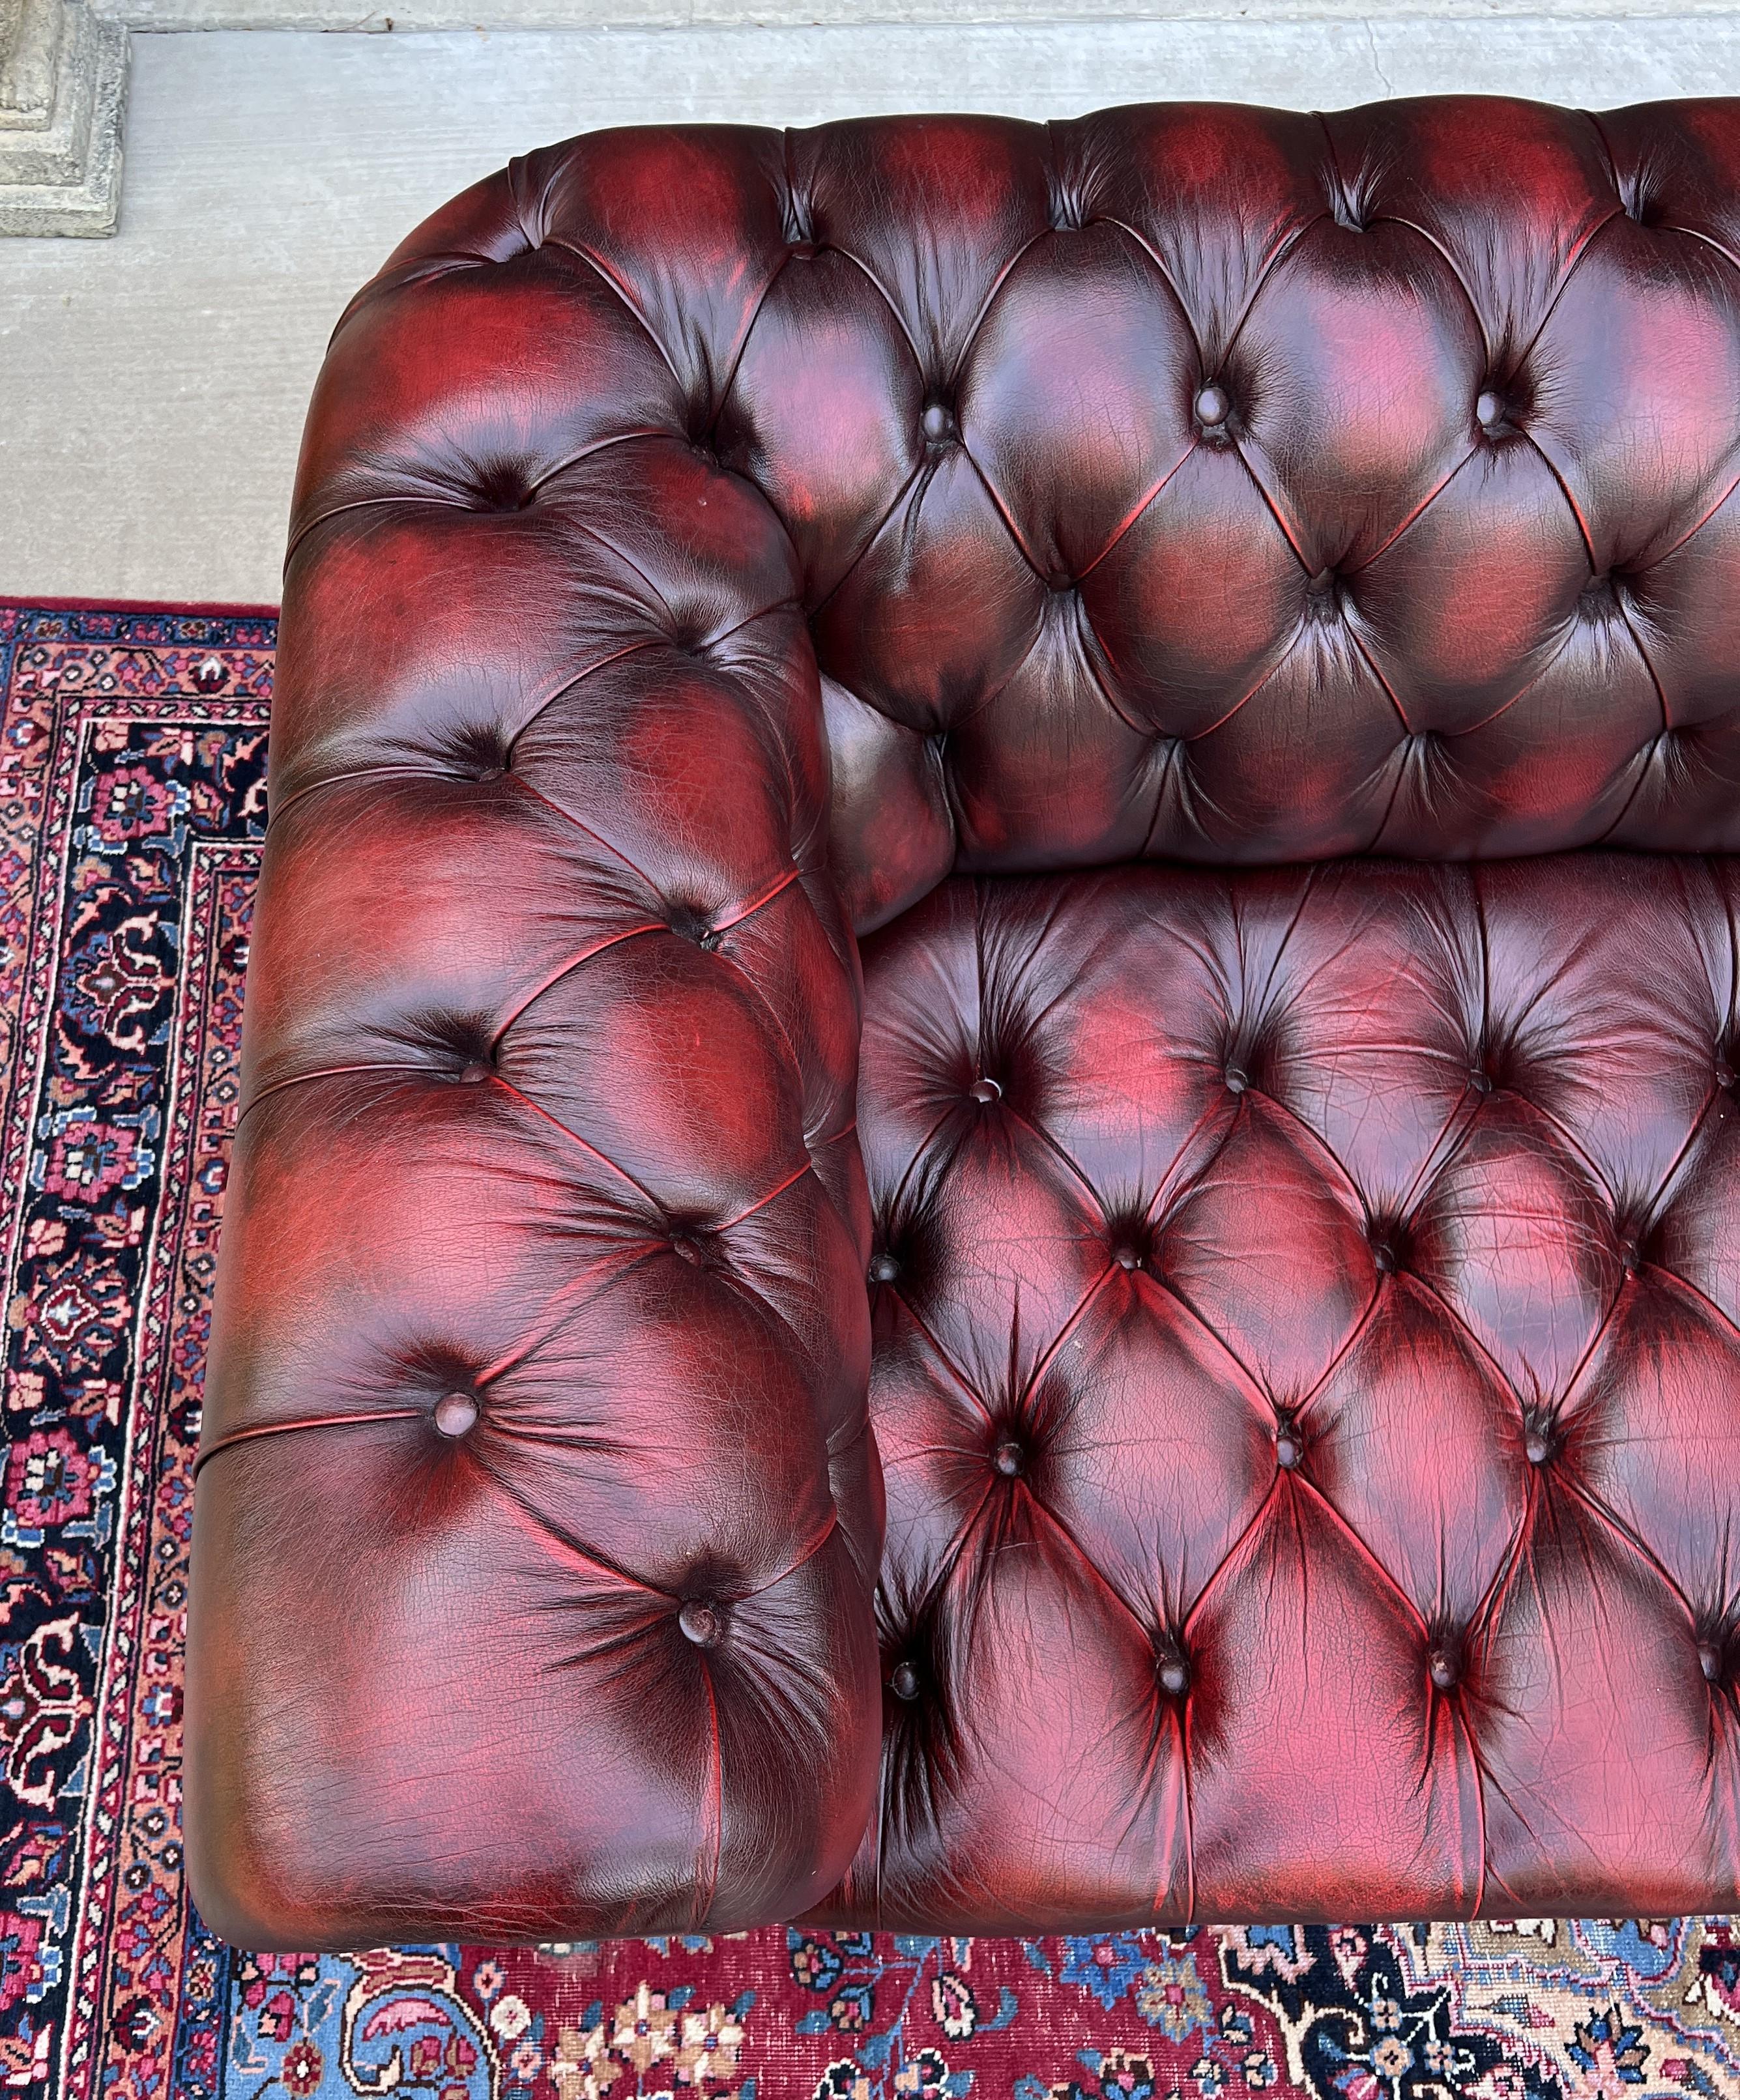 Vintage English Chesterfield Leather Sofa Tufted Seat Oxblood Red Mid-Century #2 7